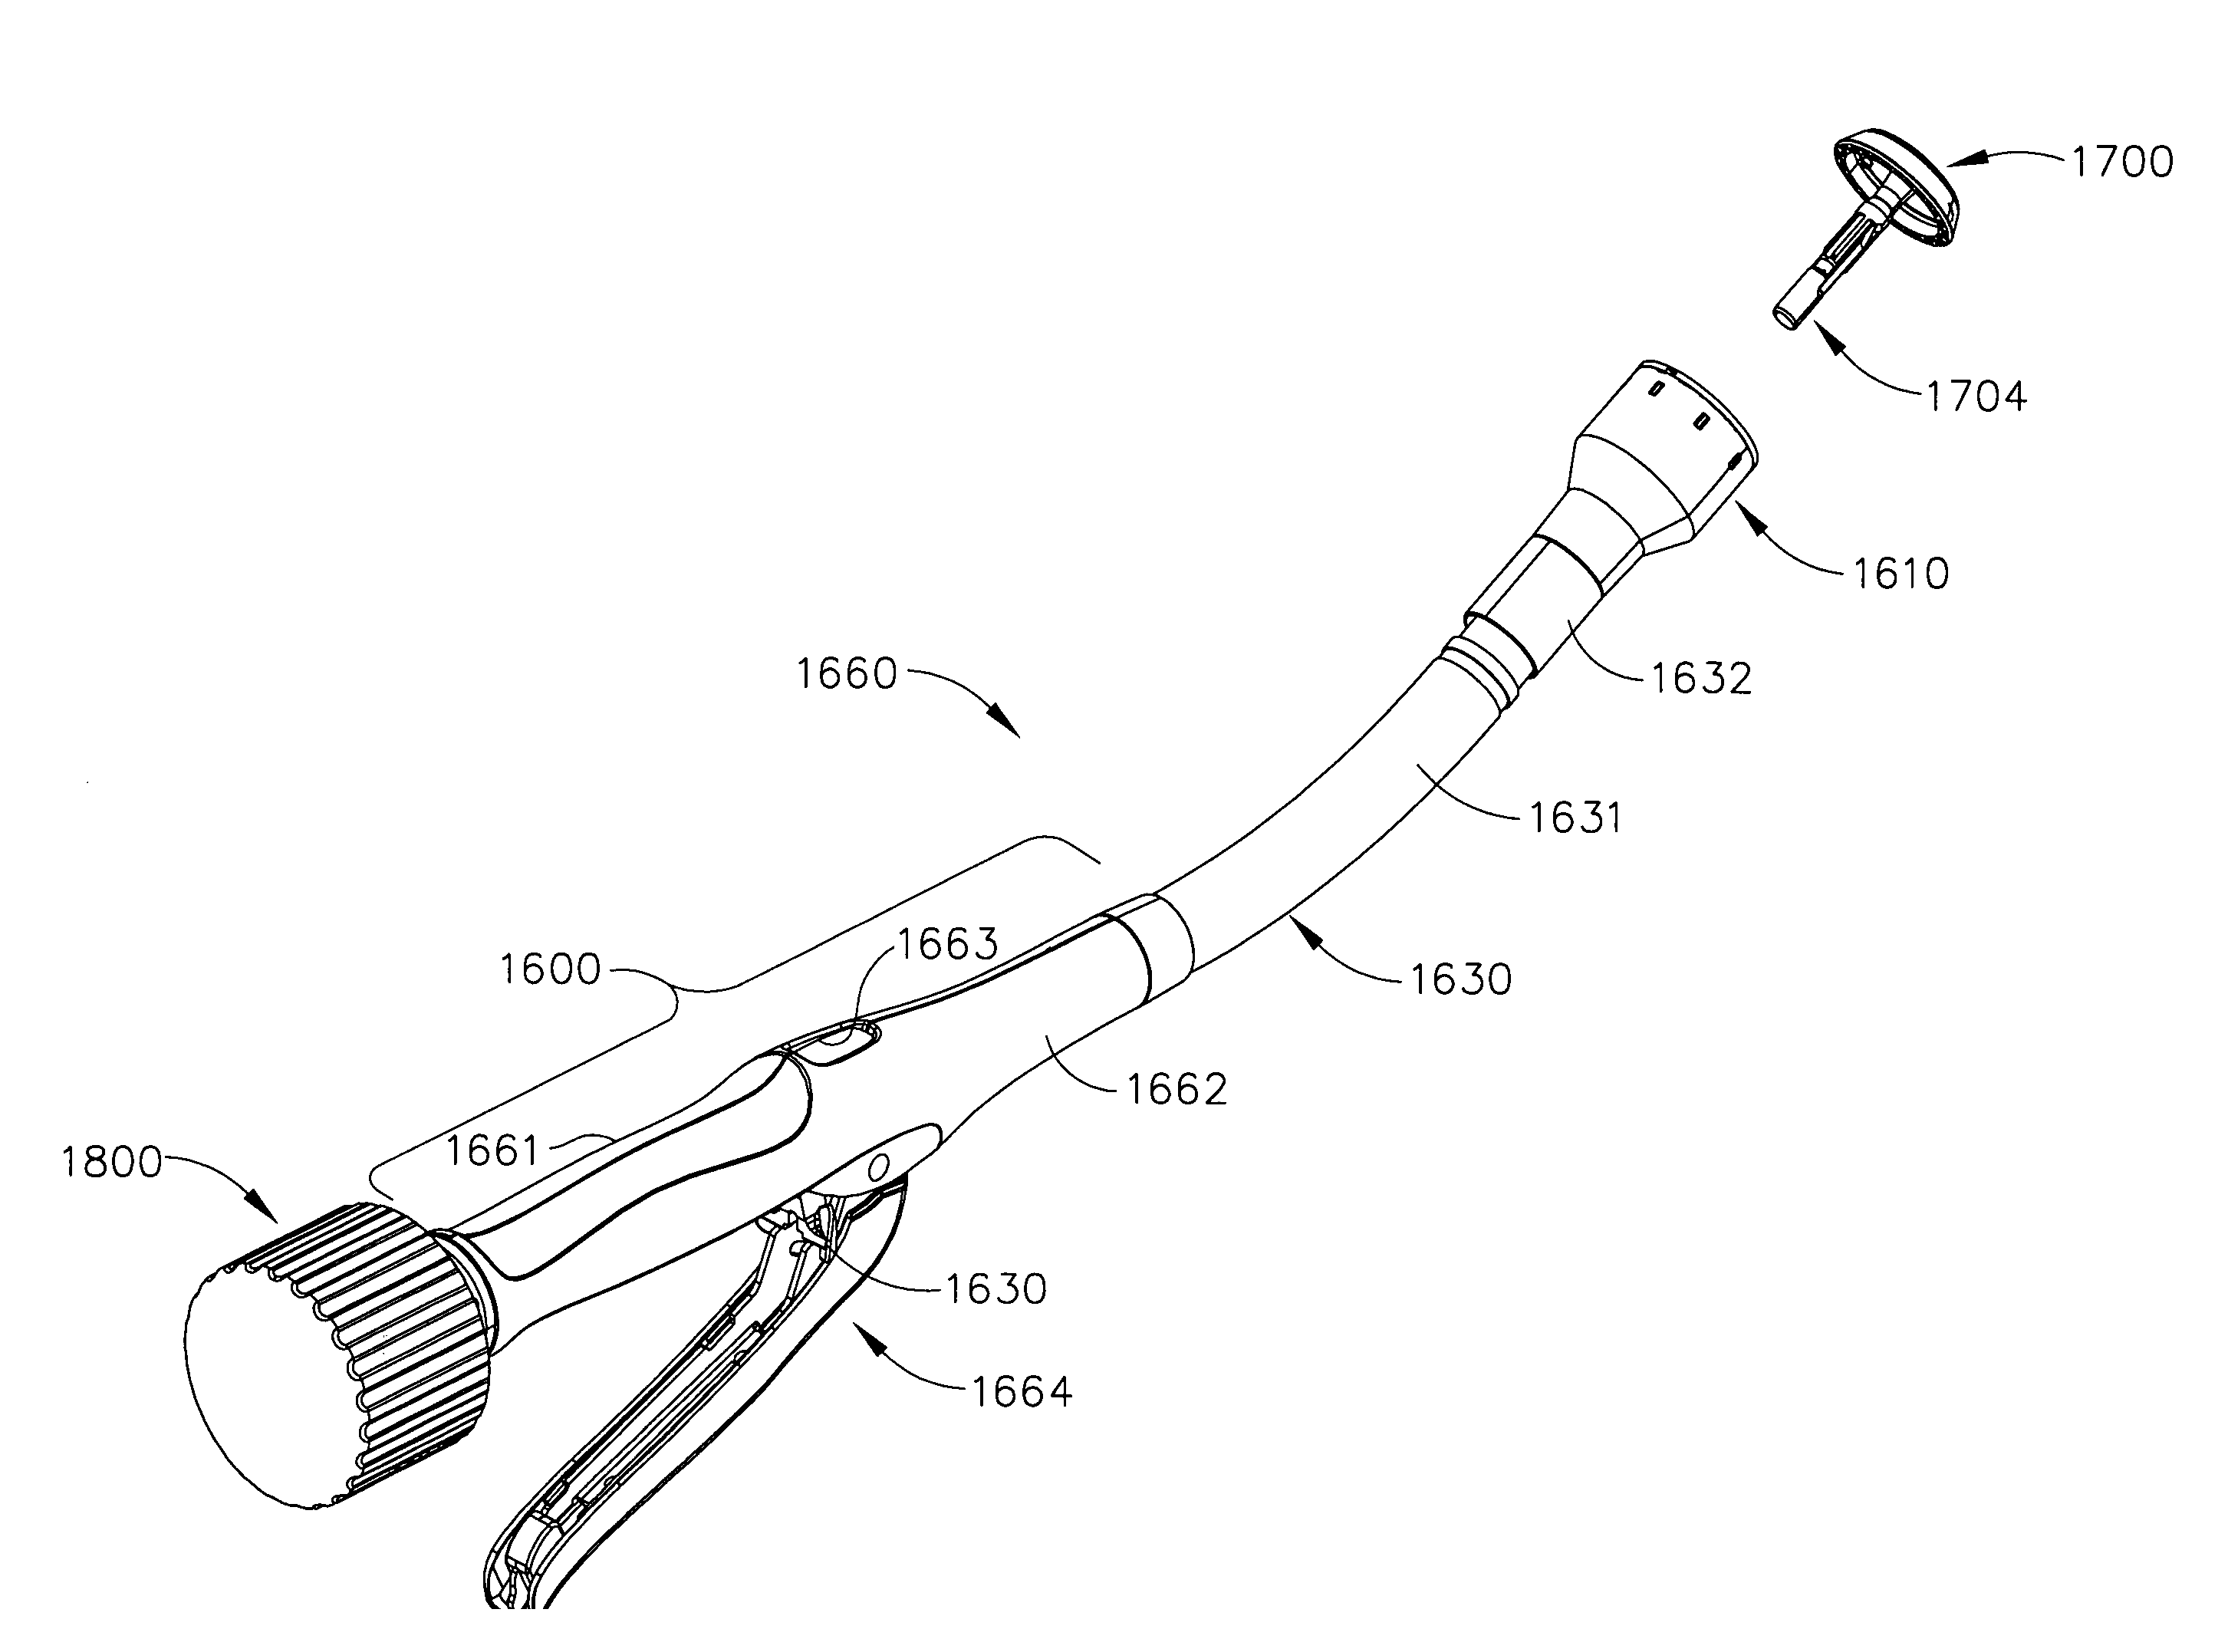 Surgical stapling instrument with mechanical mechanism for limiting maximum tissue compression